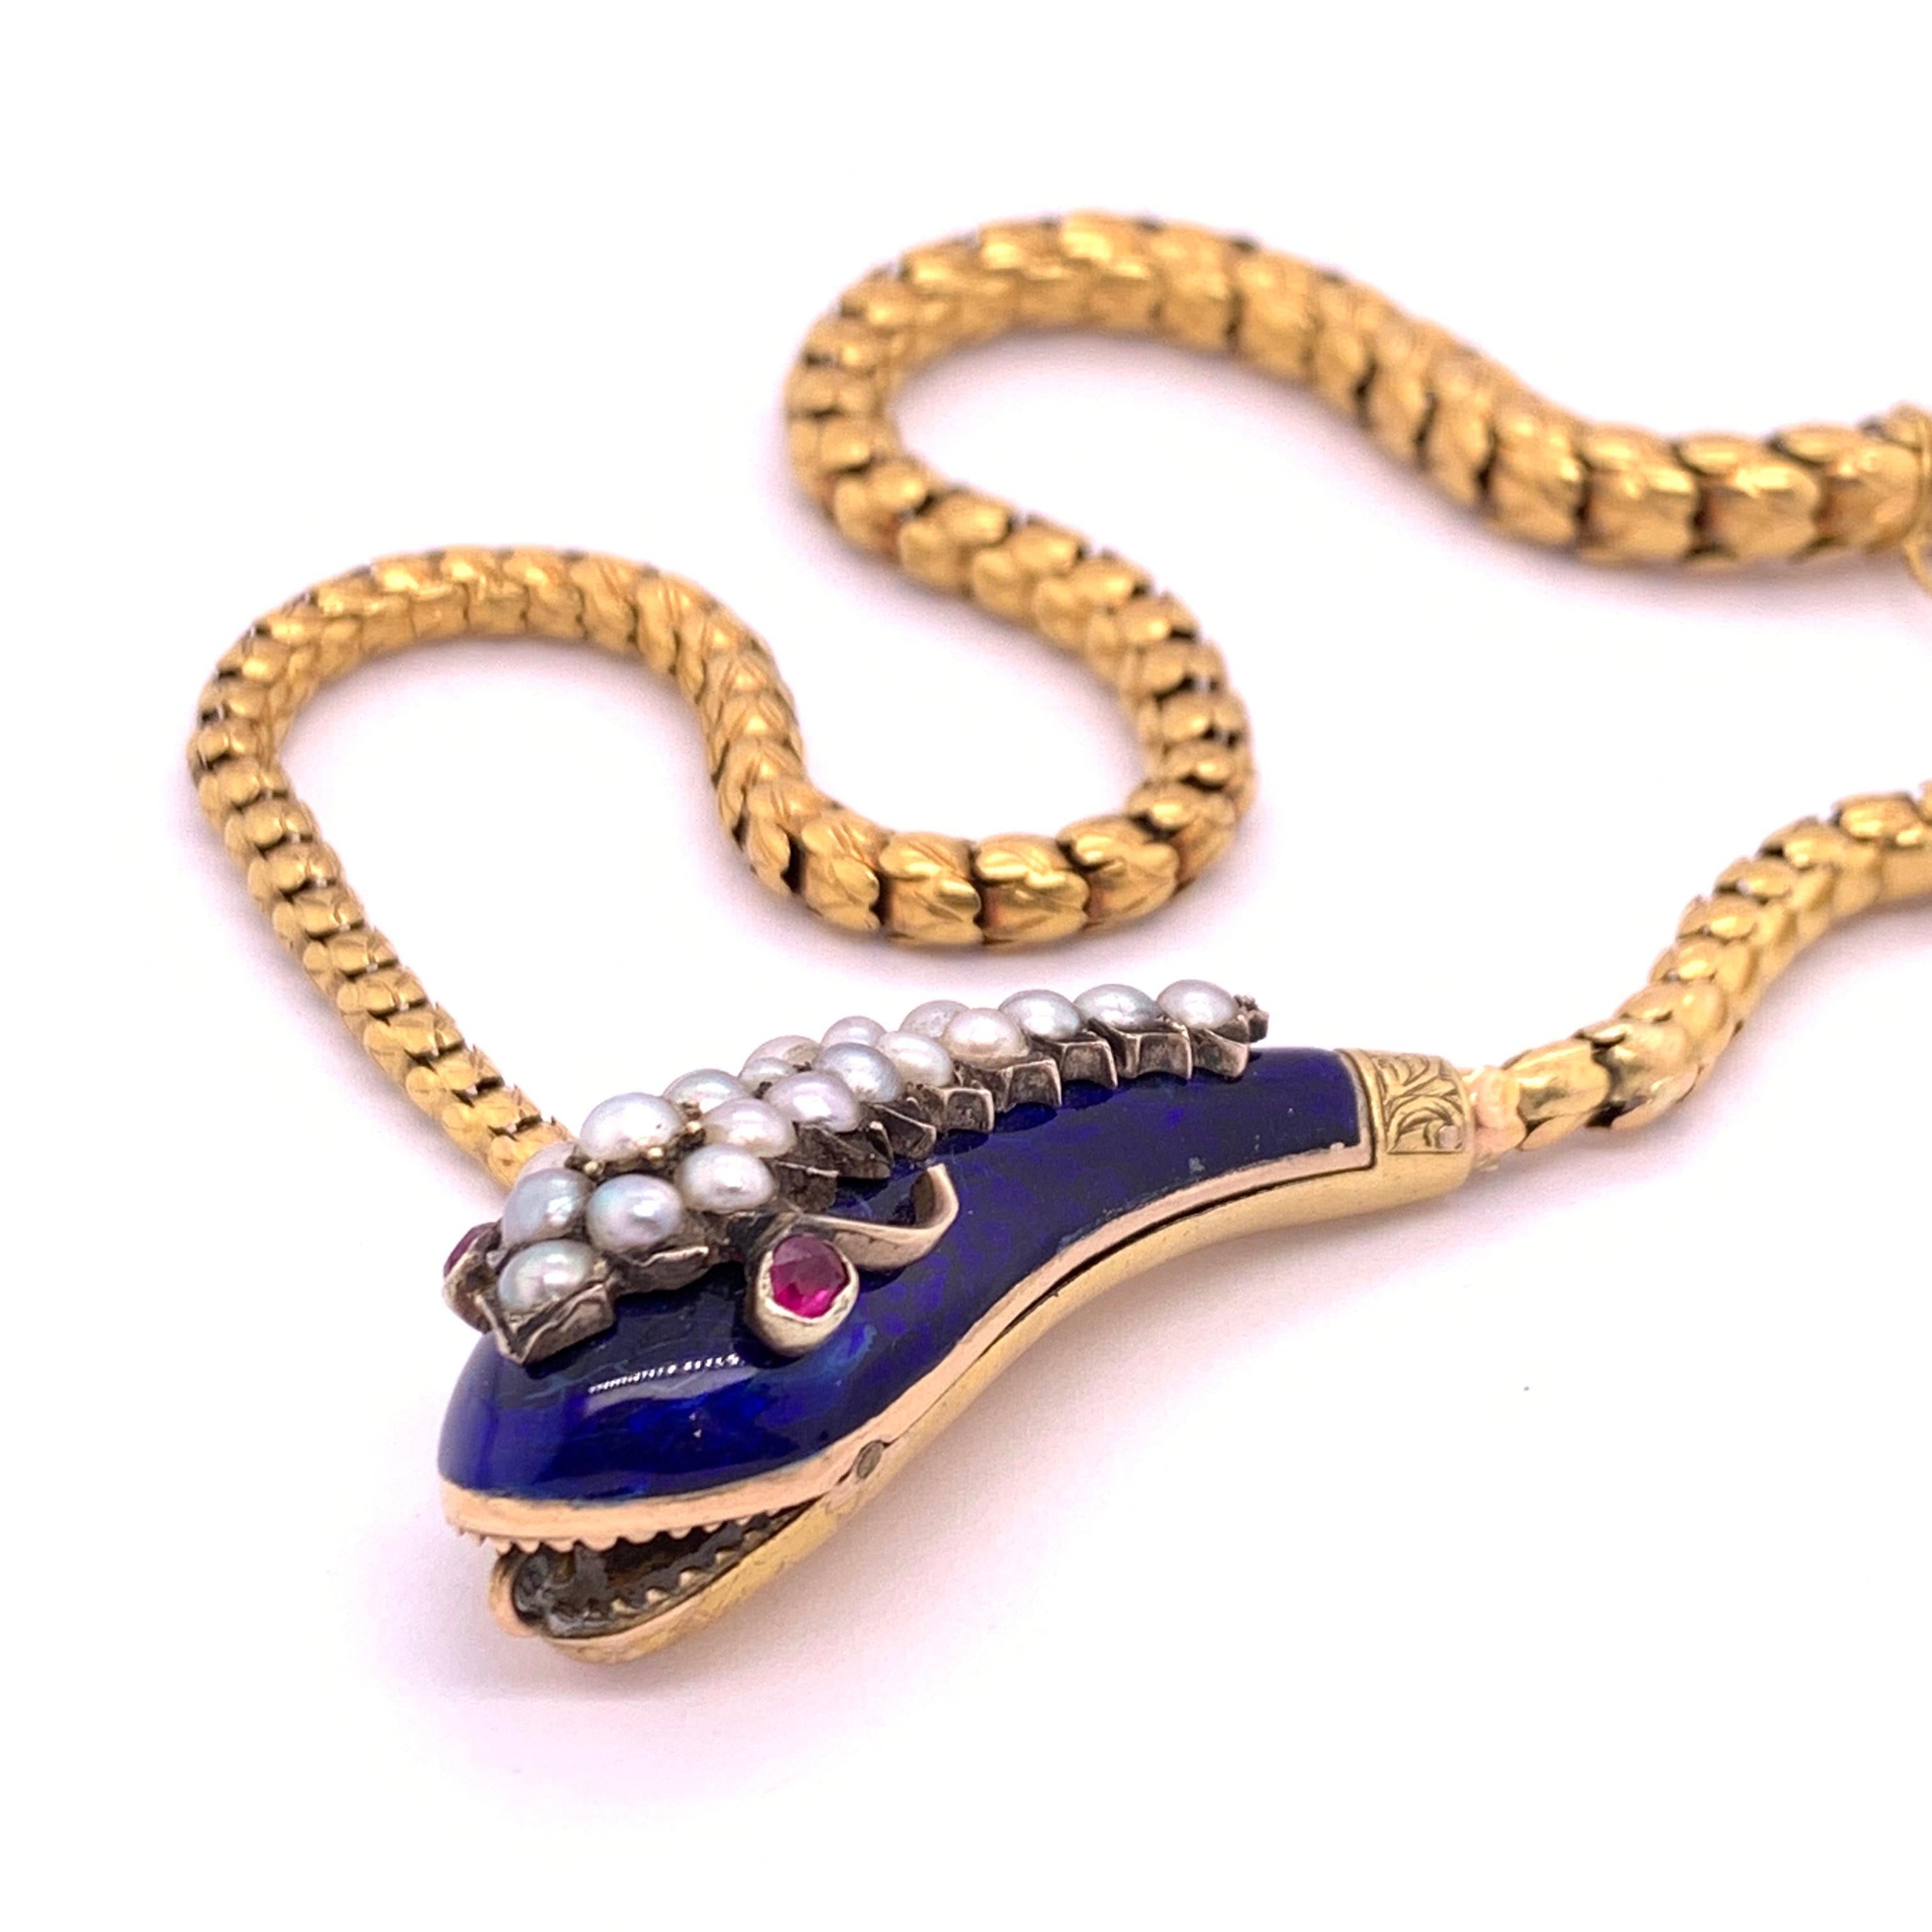 Antique snake necklace with a blue enamelled head, set with natural half pearls and rubies with a body made up of gold scales. In Victorian symbolism the snake biting its tail symbolized eternal love. Circa 1850 to 1860.